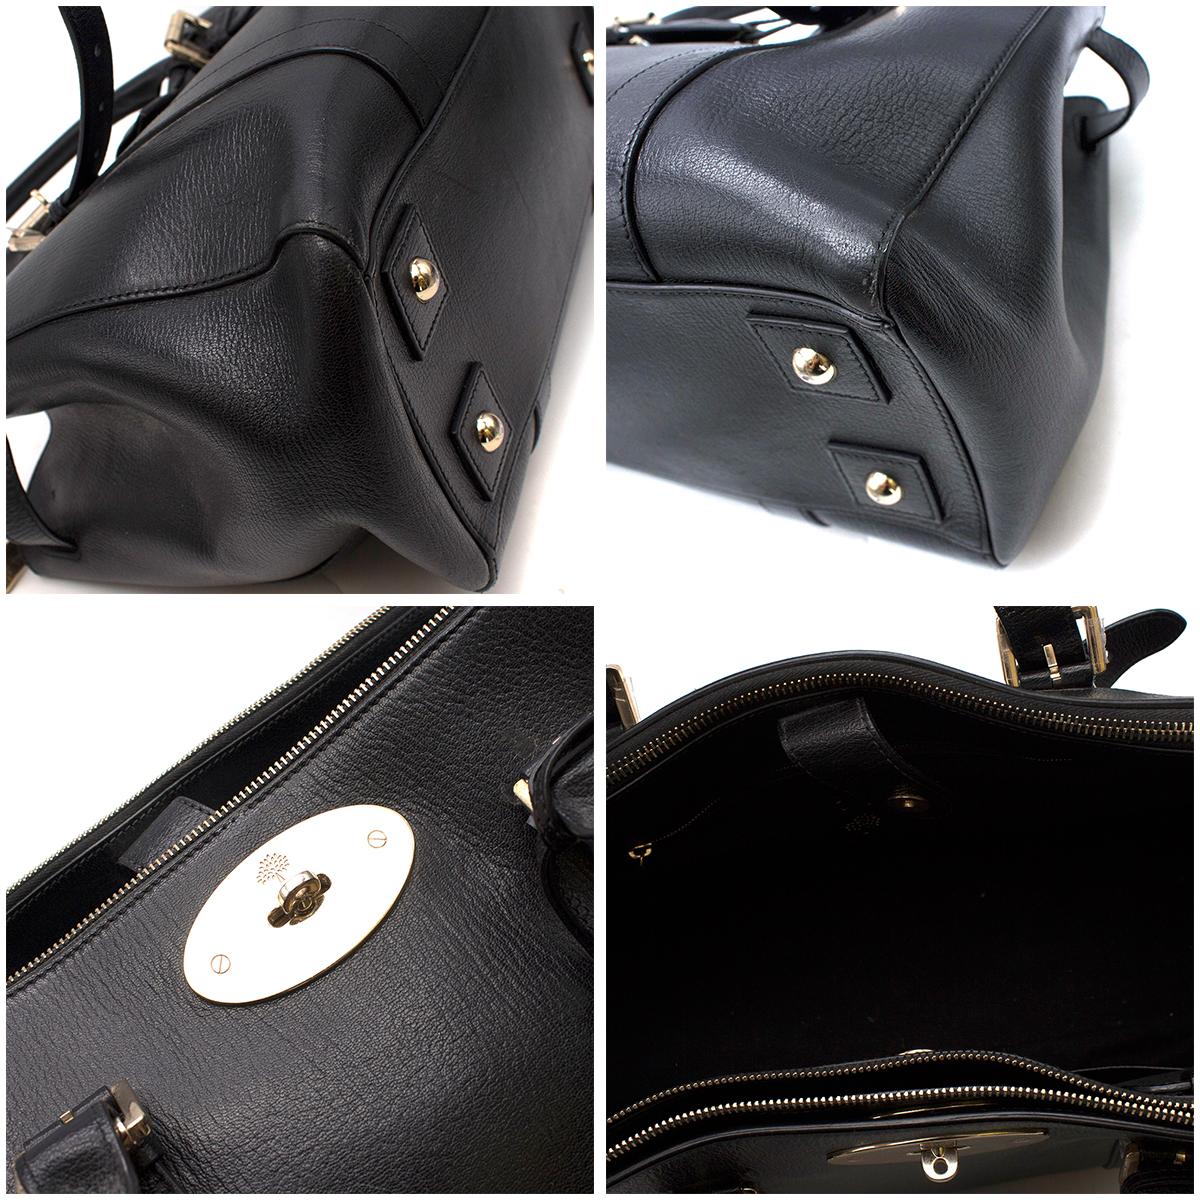 Black Mulberry Bayswater Leather Small Double Zip Tote Bag	